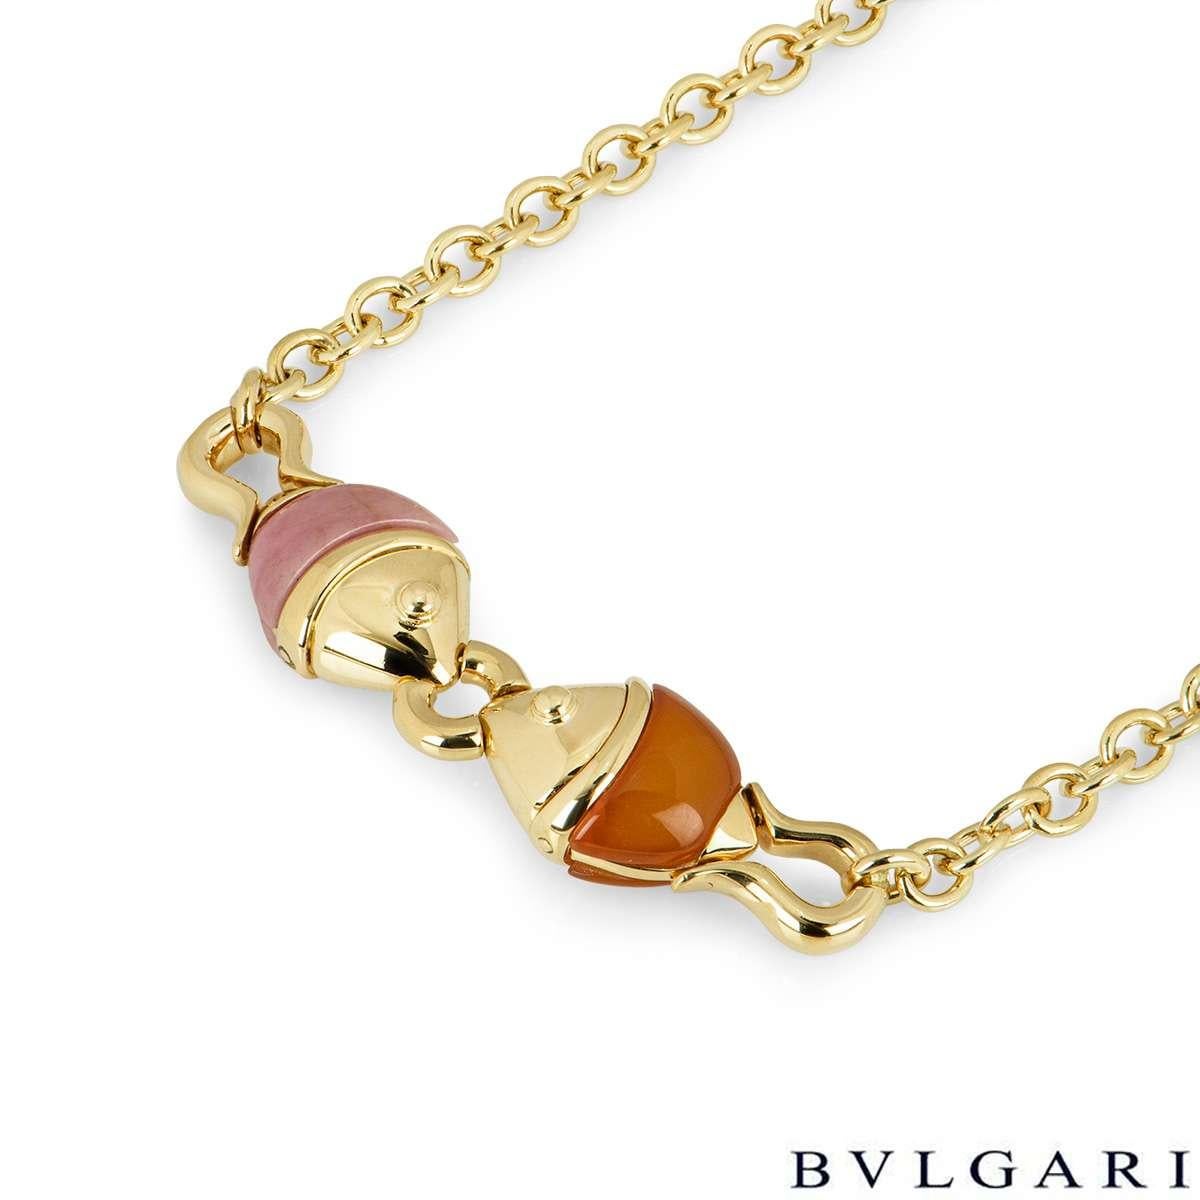 An 18k yellow gold necklace from the Naturalia collection by Bvlgari. The necklace features two fish facing each other, one is set with carnelian and the other is set with pink jade. The necklace measures 16inches in length and features a lobster